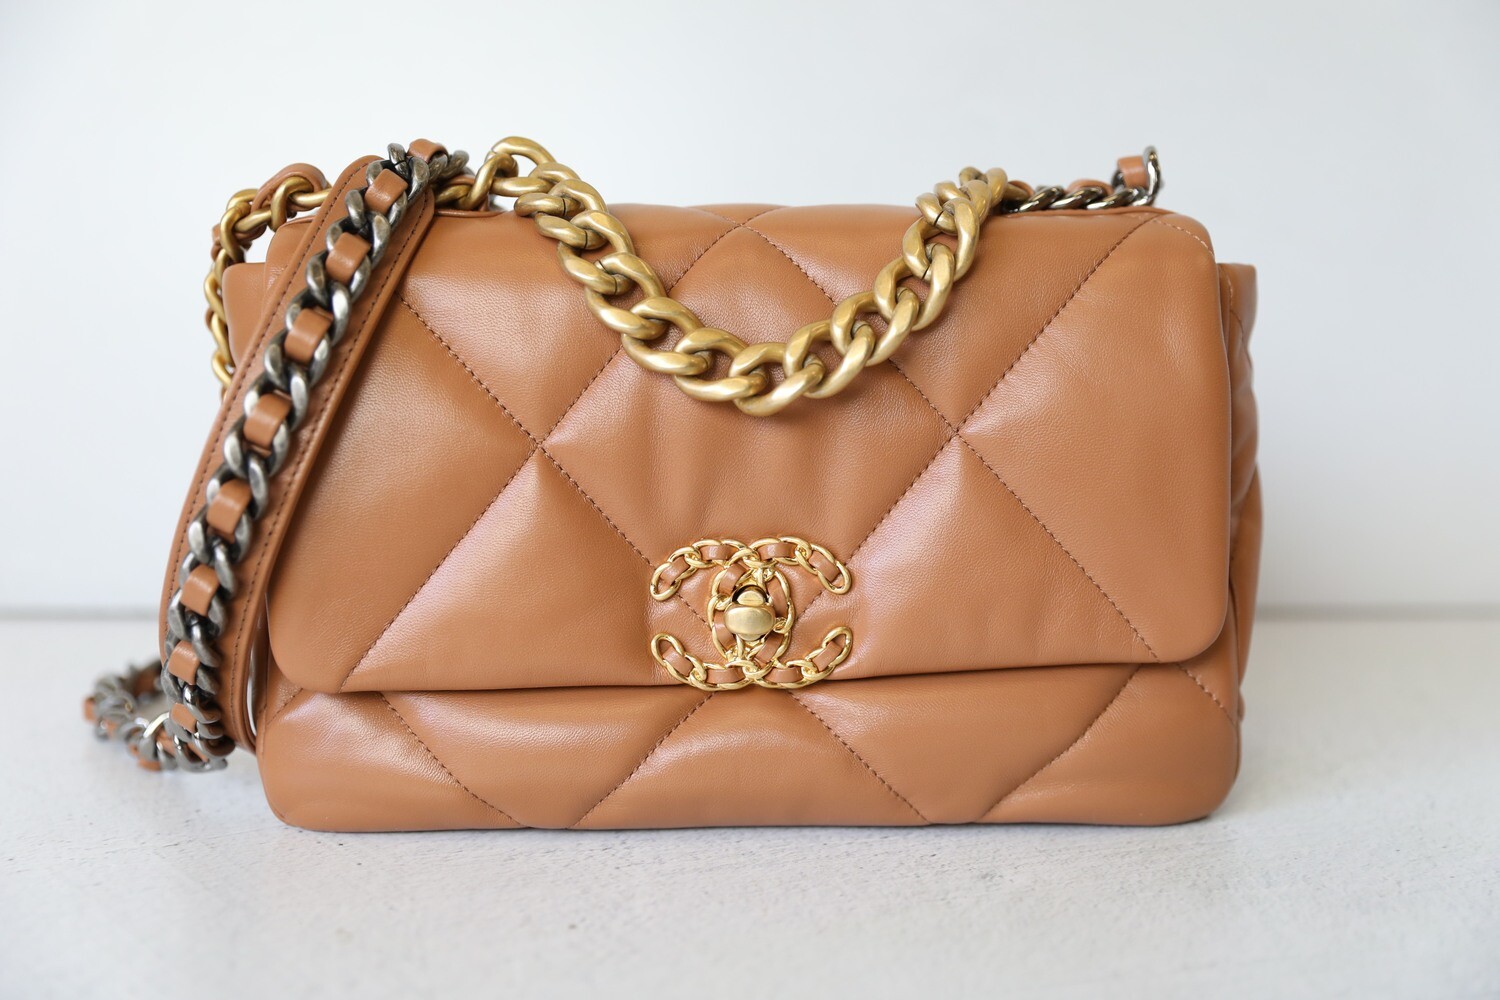 Chanel Lambskin Quilted Large Chanel 19 Flap Caramel